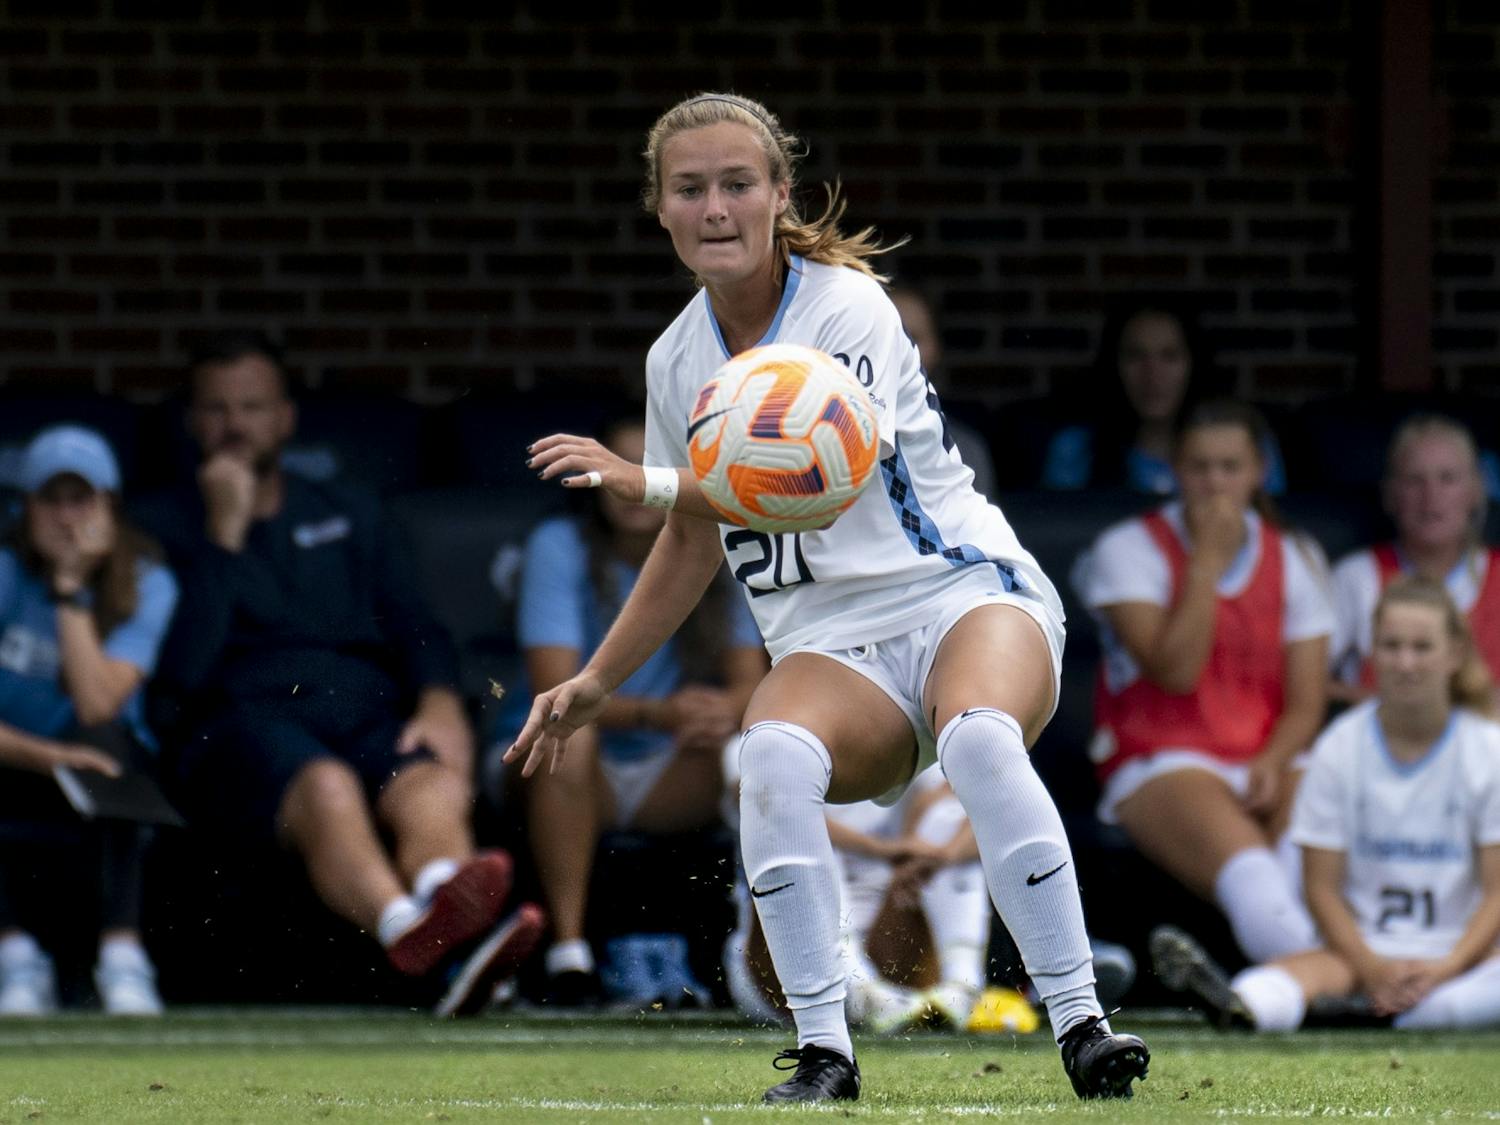 Senior midfielder Libby Moore (20) handles the ball at the UNC women’s soccer game against Boston College at Dorrance Field on Sunday, Sept. 25, 2022. UNC won 3-0.